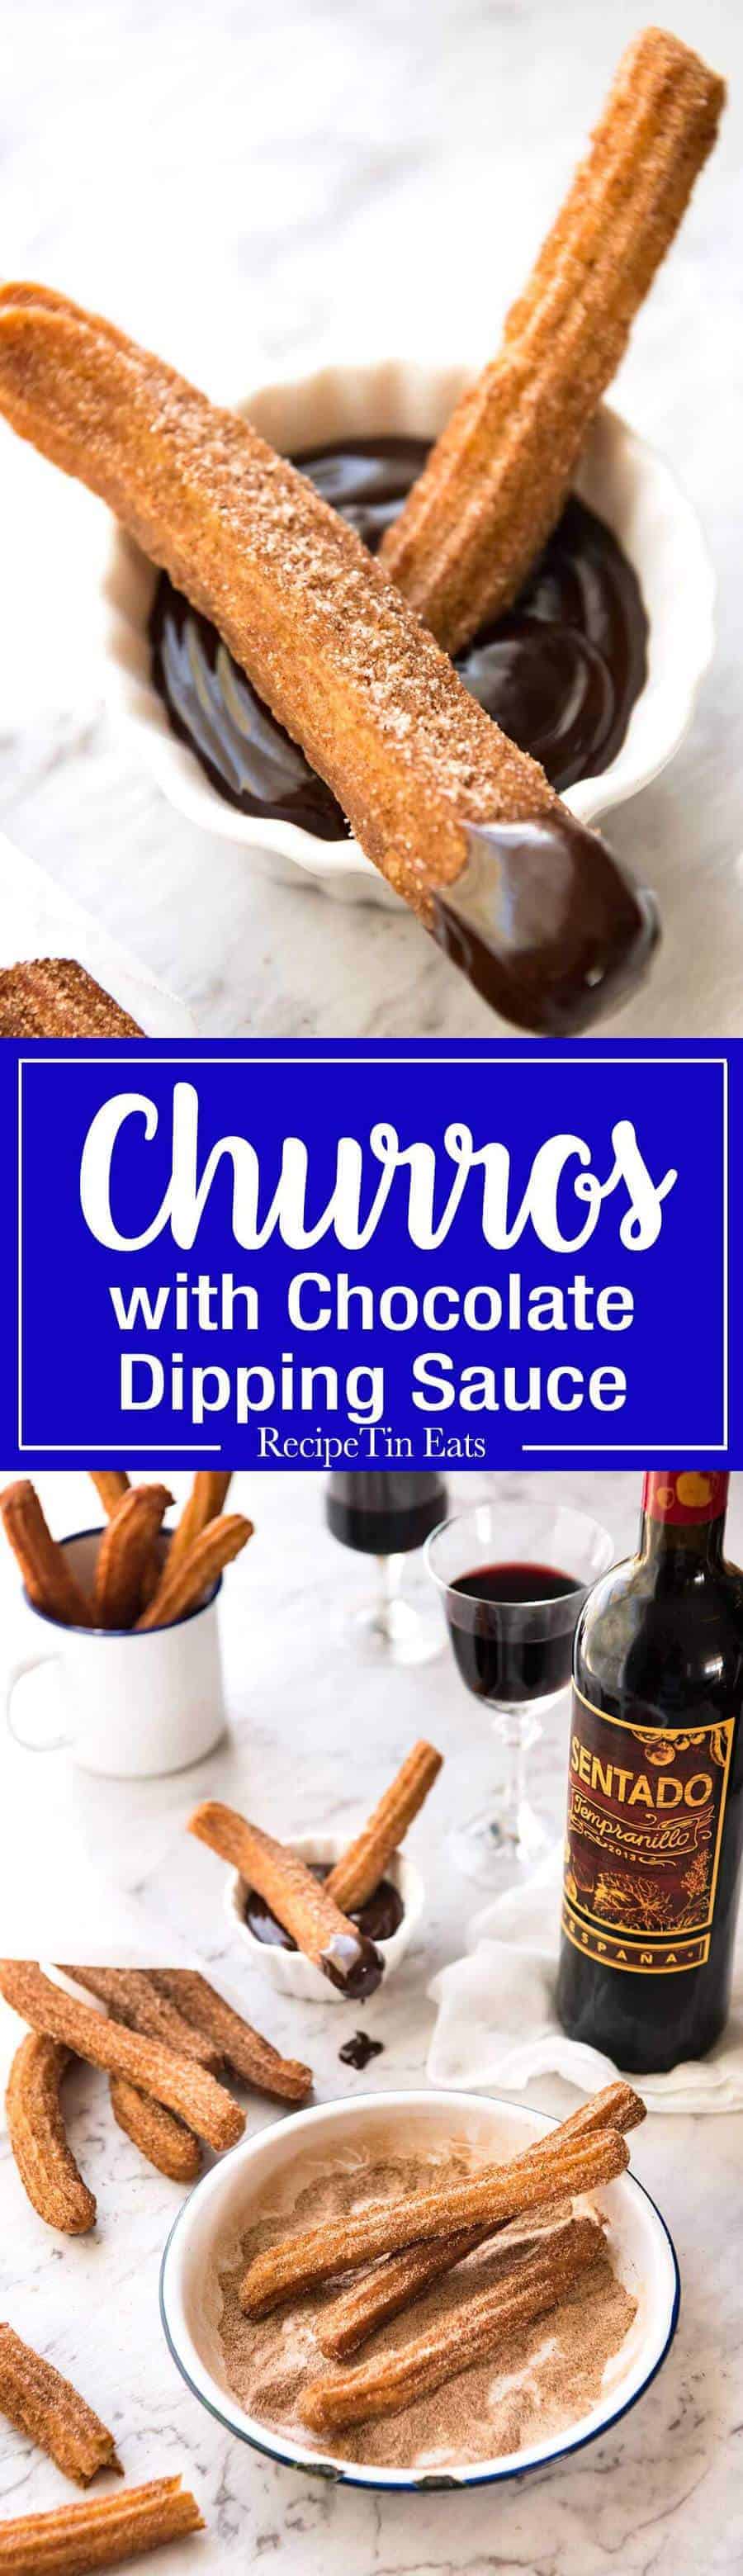 Spanish Churros - Surprisingly easy to make, the batter is made with just flour, baking powder, olive oil and water. 20 minutes, start to finish! recipetineats.com